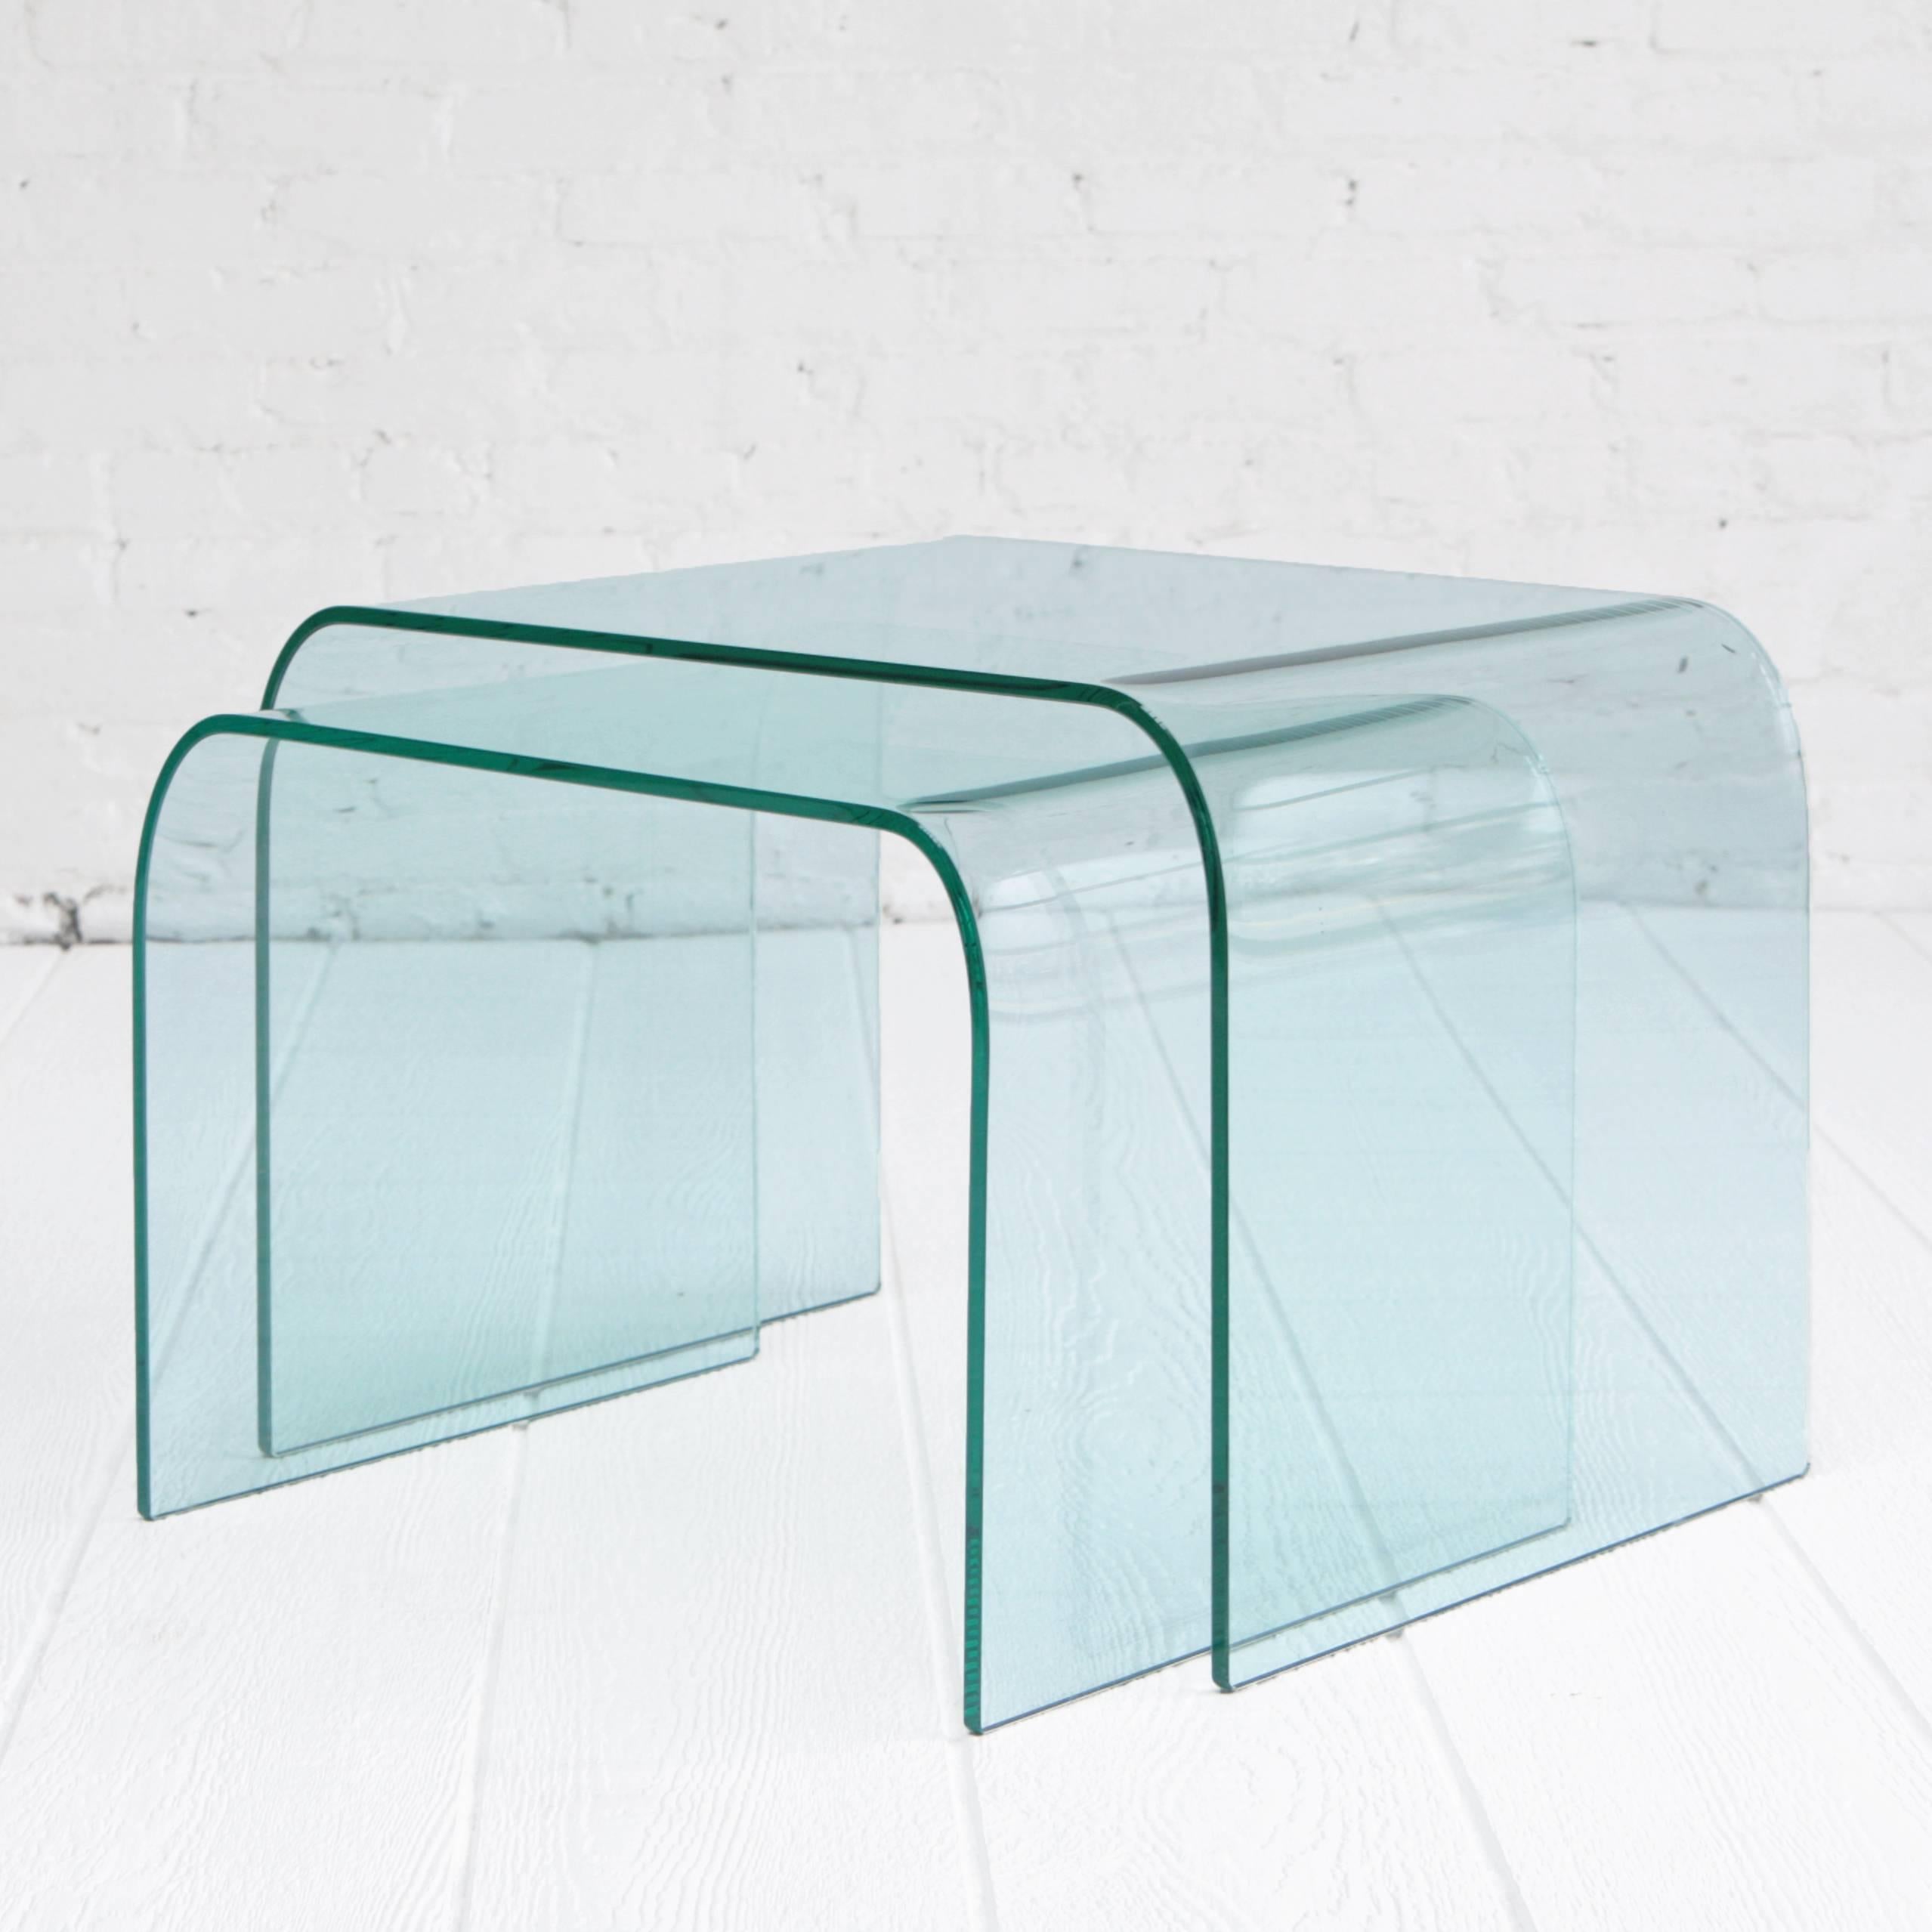 Molded glass nesting tables by Angelo Cortesi, made in Italy. They nest together and can be used in so many ways. When pulled apart they make a beautiful layered effect. The glass is tempered and the edges are beveled.